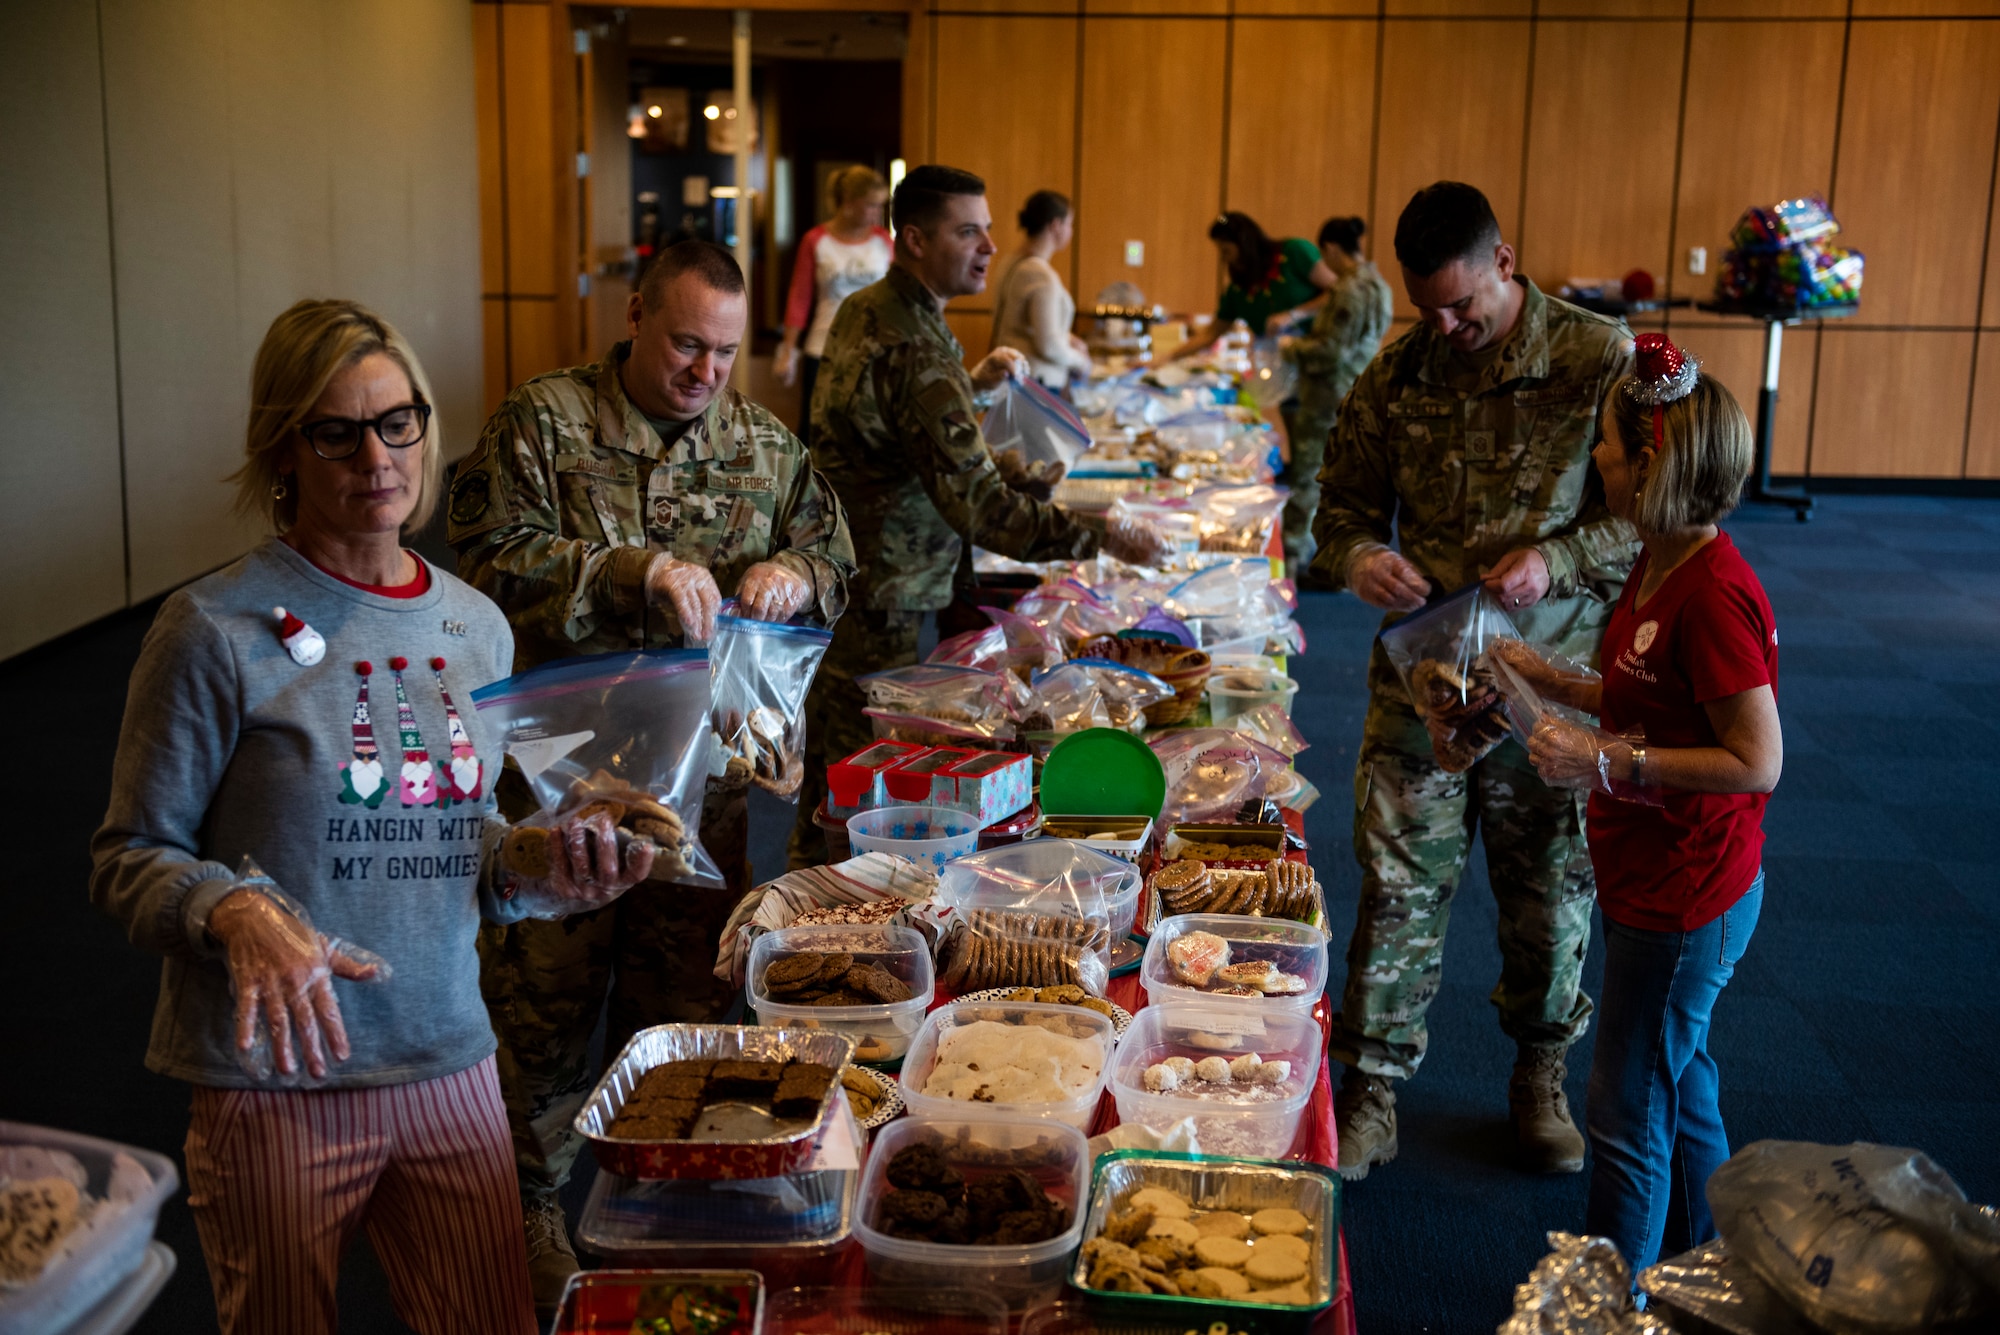 Airmen and first sergeants from the 325th Fighter Wing bag holiday cookies with members of the Tyndall Spouses Club at Tyndall Air Force Base, Florida, Dec. 9, 2019. The Tyndall Spouses Club and Tyndall First Sergeants held a Cookie Caper event, where they collected hundreds of donated cookies to distribute to Airmen living in the on base dormitories, as well as giving extra cookies to units and offices on base. The goal of the event was to take care of Airmen and to give back to those who serve the wing's mission. (U.S. Air Force photo by Staff Sgt. Magen M. Reeves)